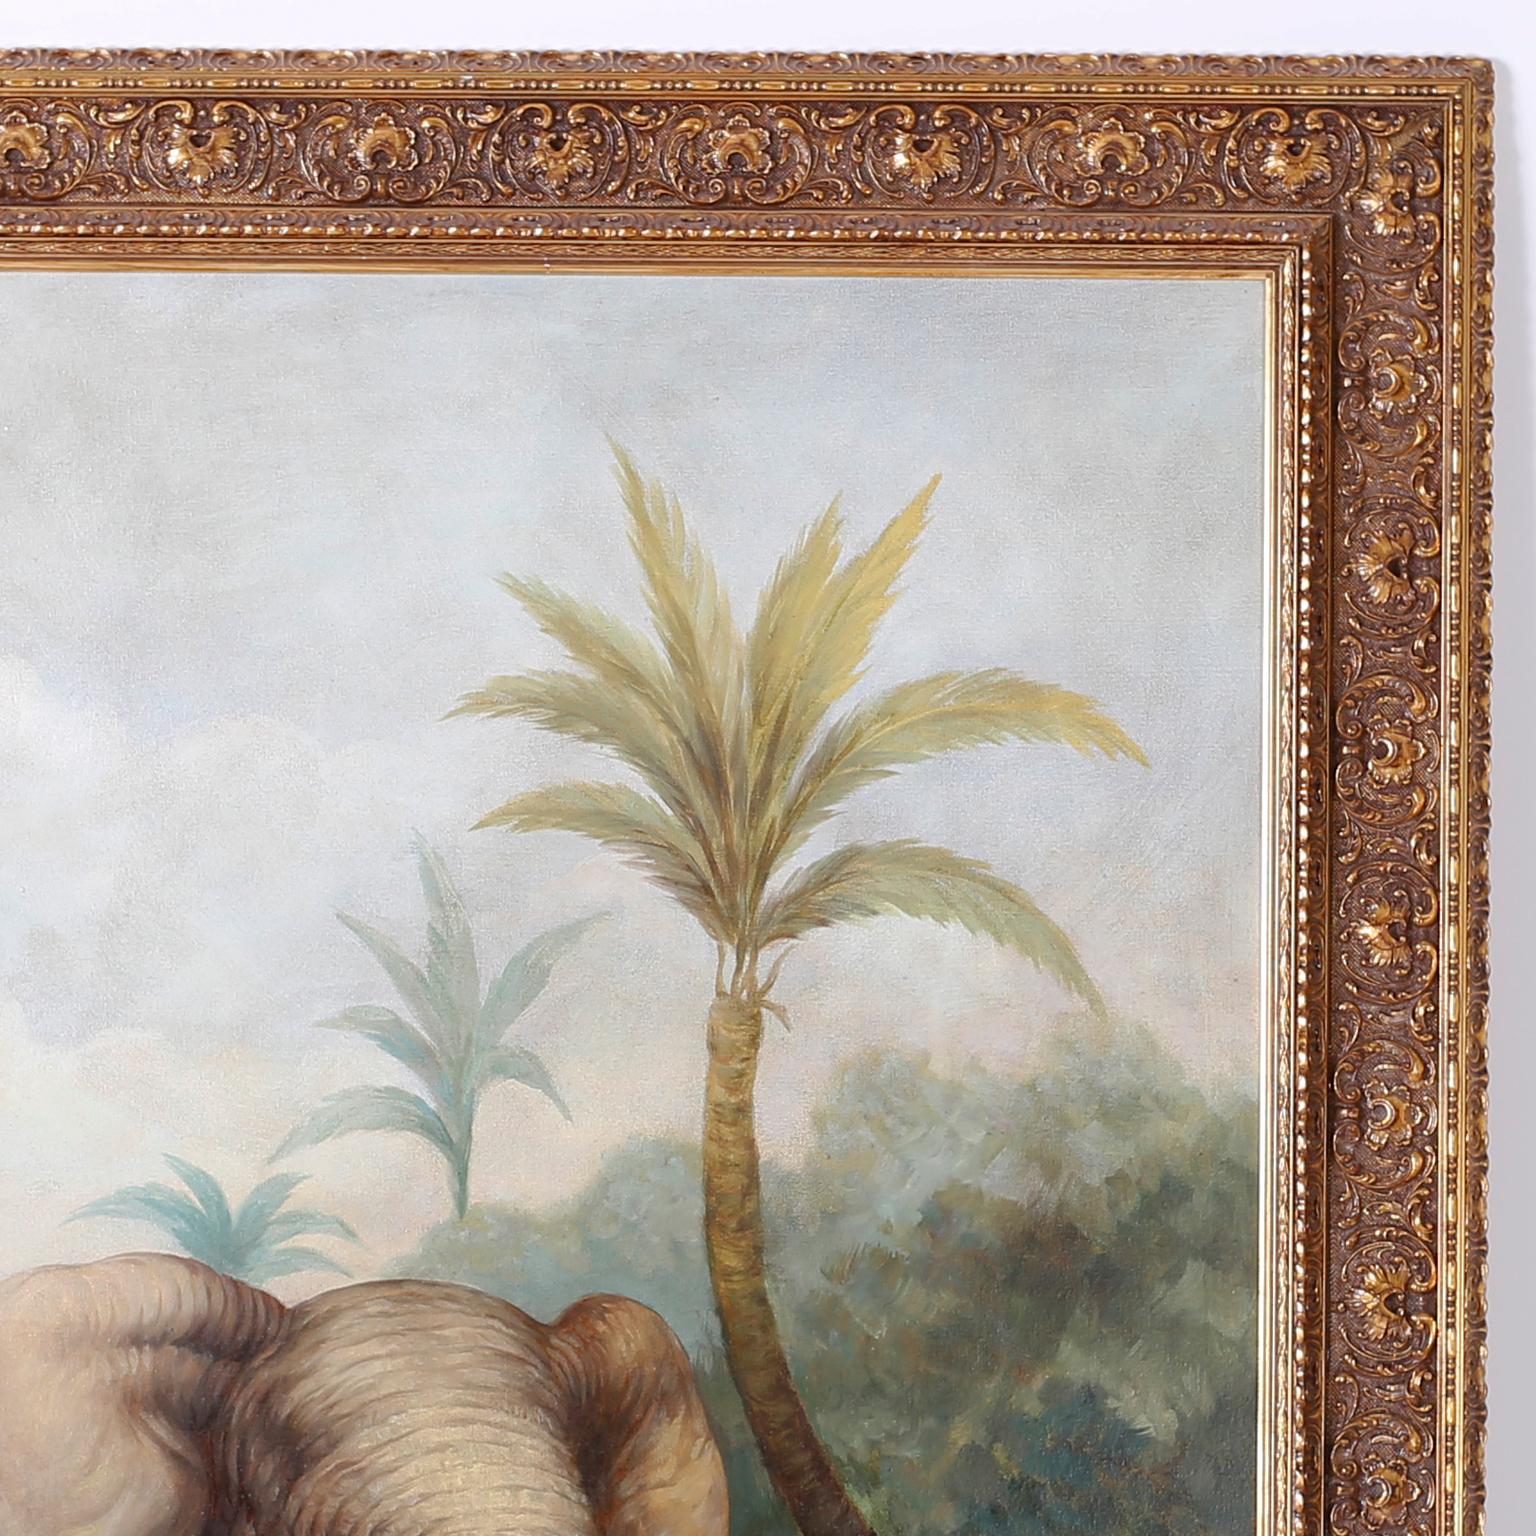 British Colonial Large Oil Painting on Canvas of an Elephant and a Man